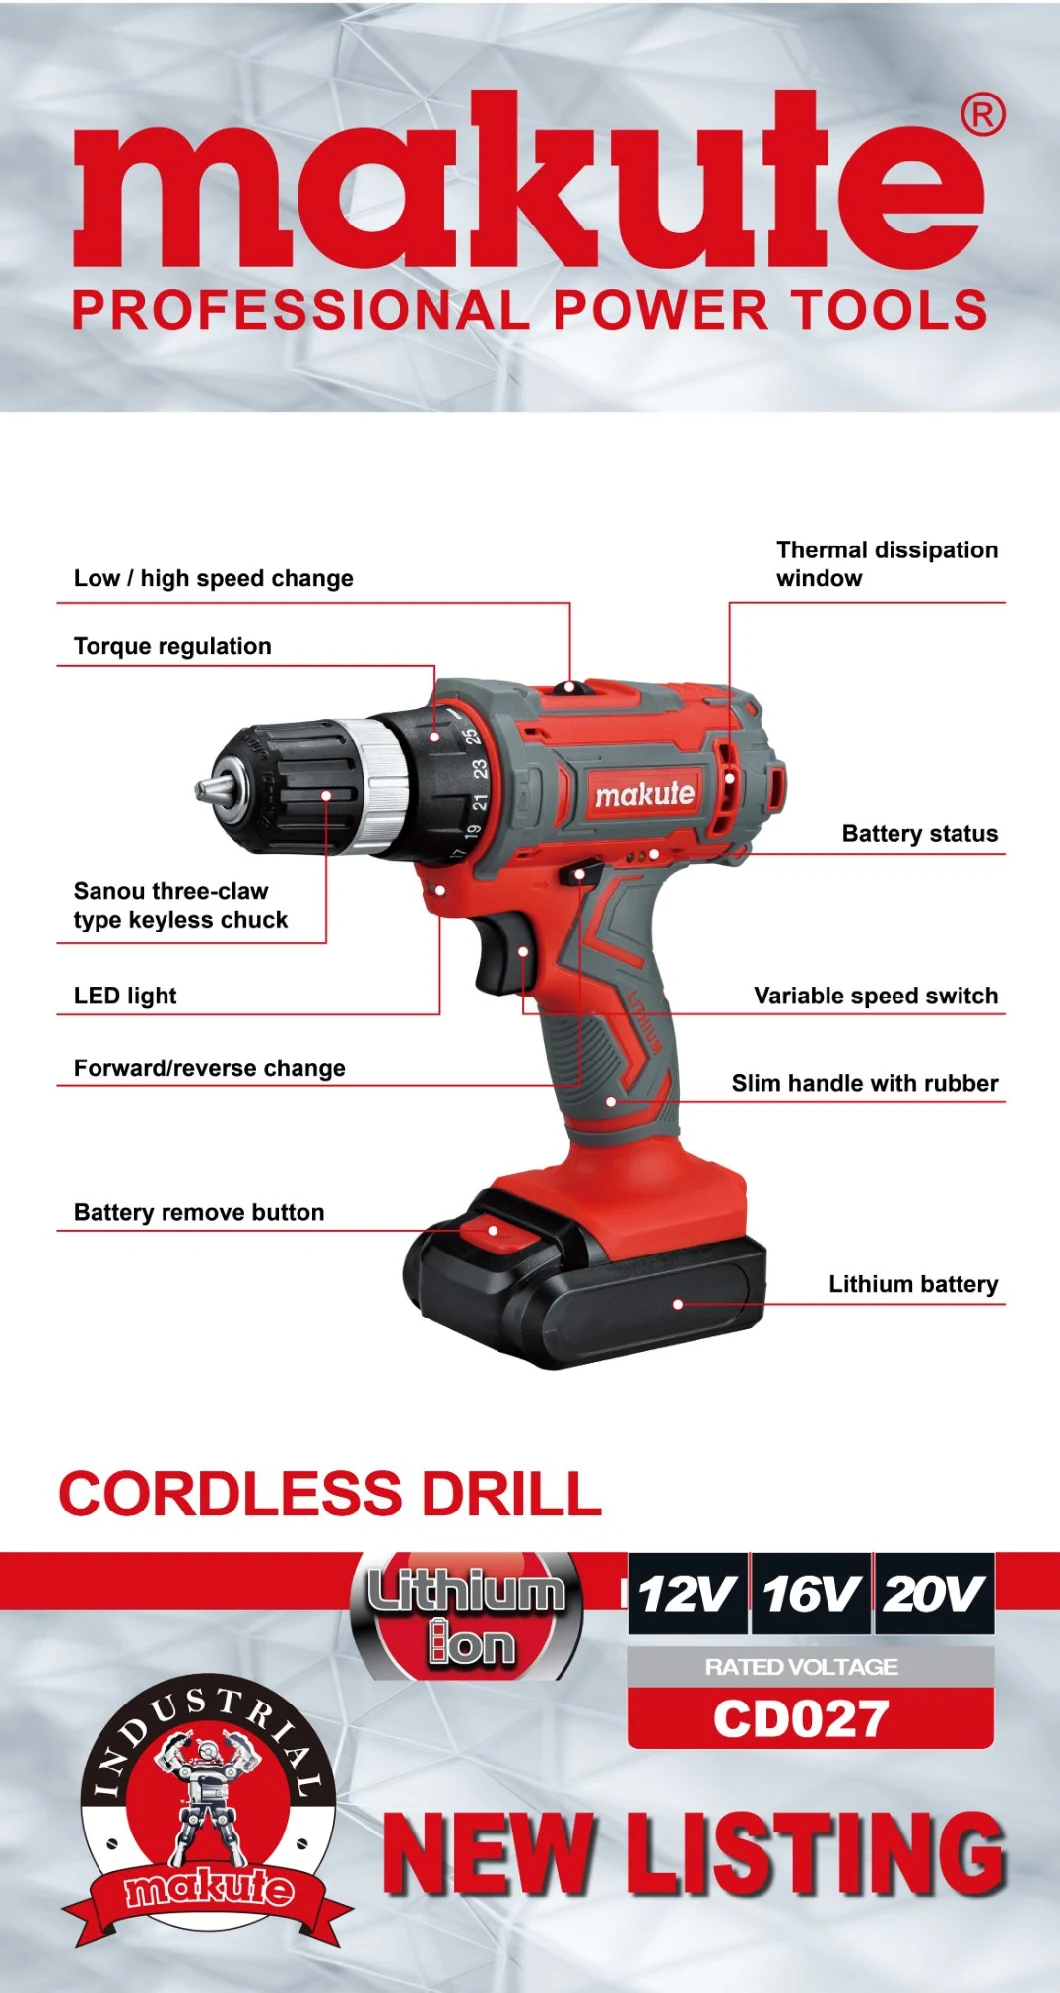 20V Multi Power Tools Supplier Electric Power Drill Hardware Rotary Dewalt Grinder Cordless Tool Sets Tools